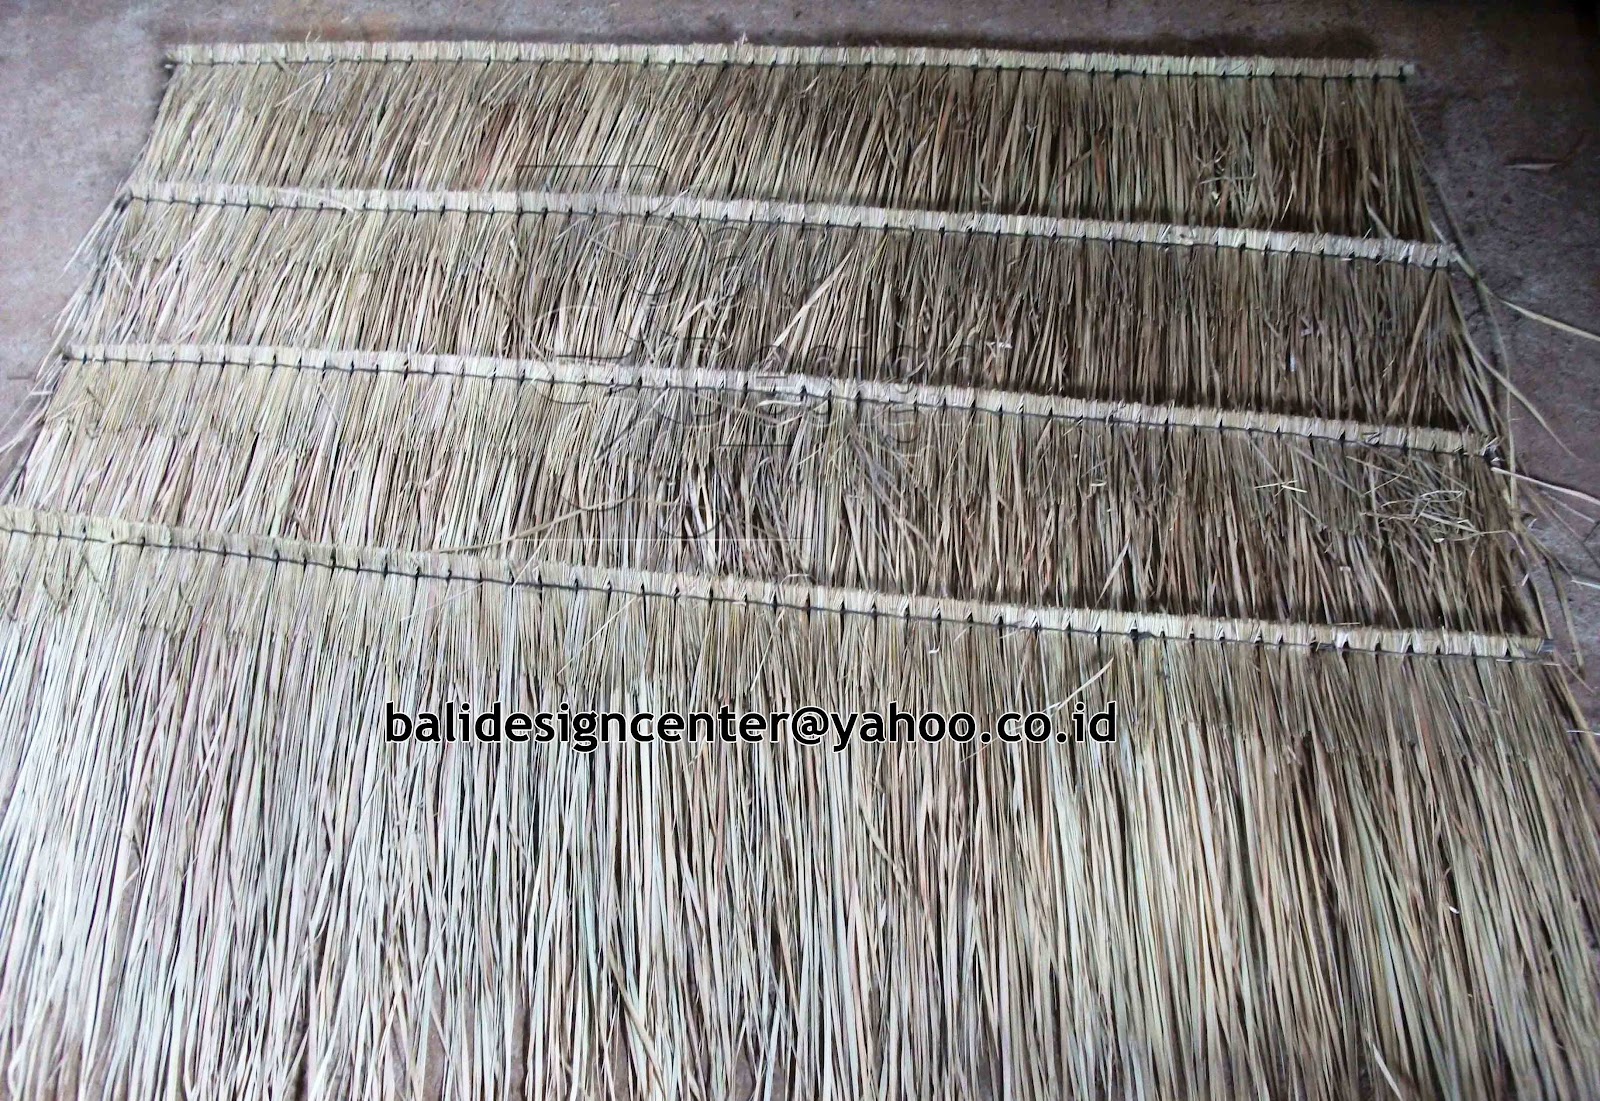 ATAP ILALANG (THATCHED ROOF)